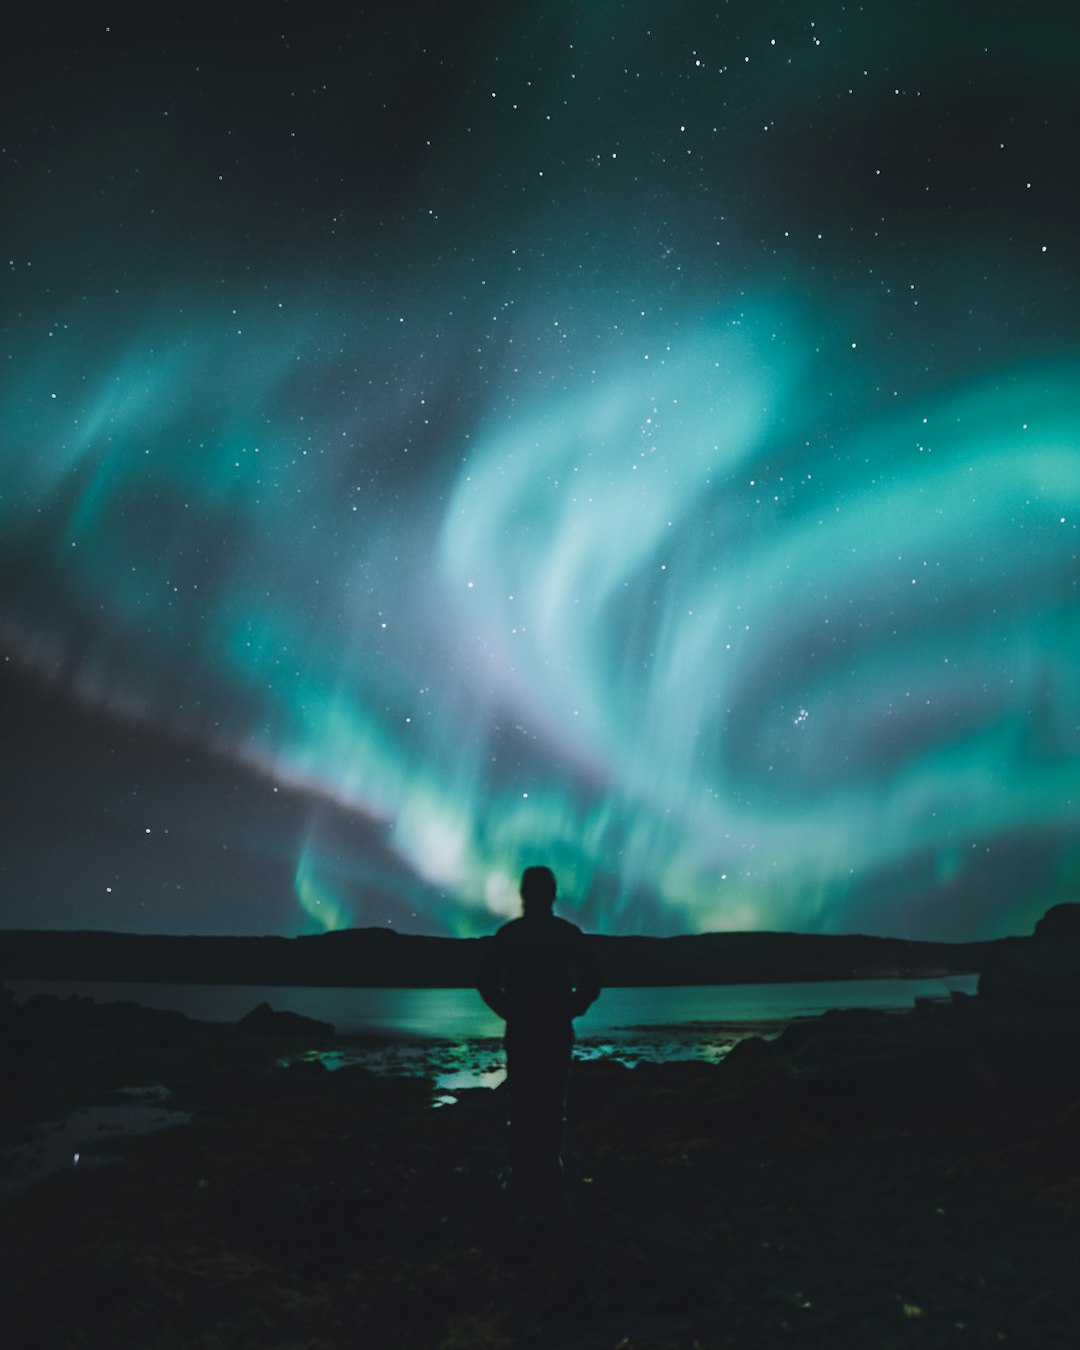 A person standing on the shore of an ocean, gazing at the vibrant aurora borealis in the starring night sky. The northern lights dance across the dark canvas with hues like green and blue, creating mesmerizing patterns that enhance their beauty. A man stands tall against his silhouette as he watches this celestial display. He is dressed casually yet elegantly to match the magical atmosphere. Captured from behind him using a wide-angle lens in the style of Nikon D850 DSLR camera with a hip level shot, high resolution, natural lighting, HDR. –ar 51:64